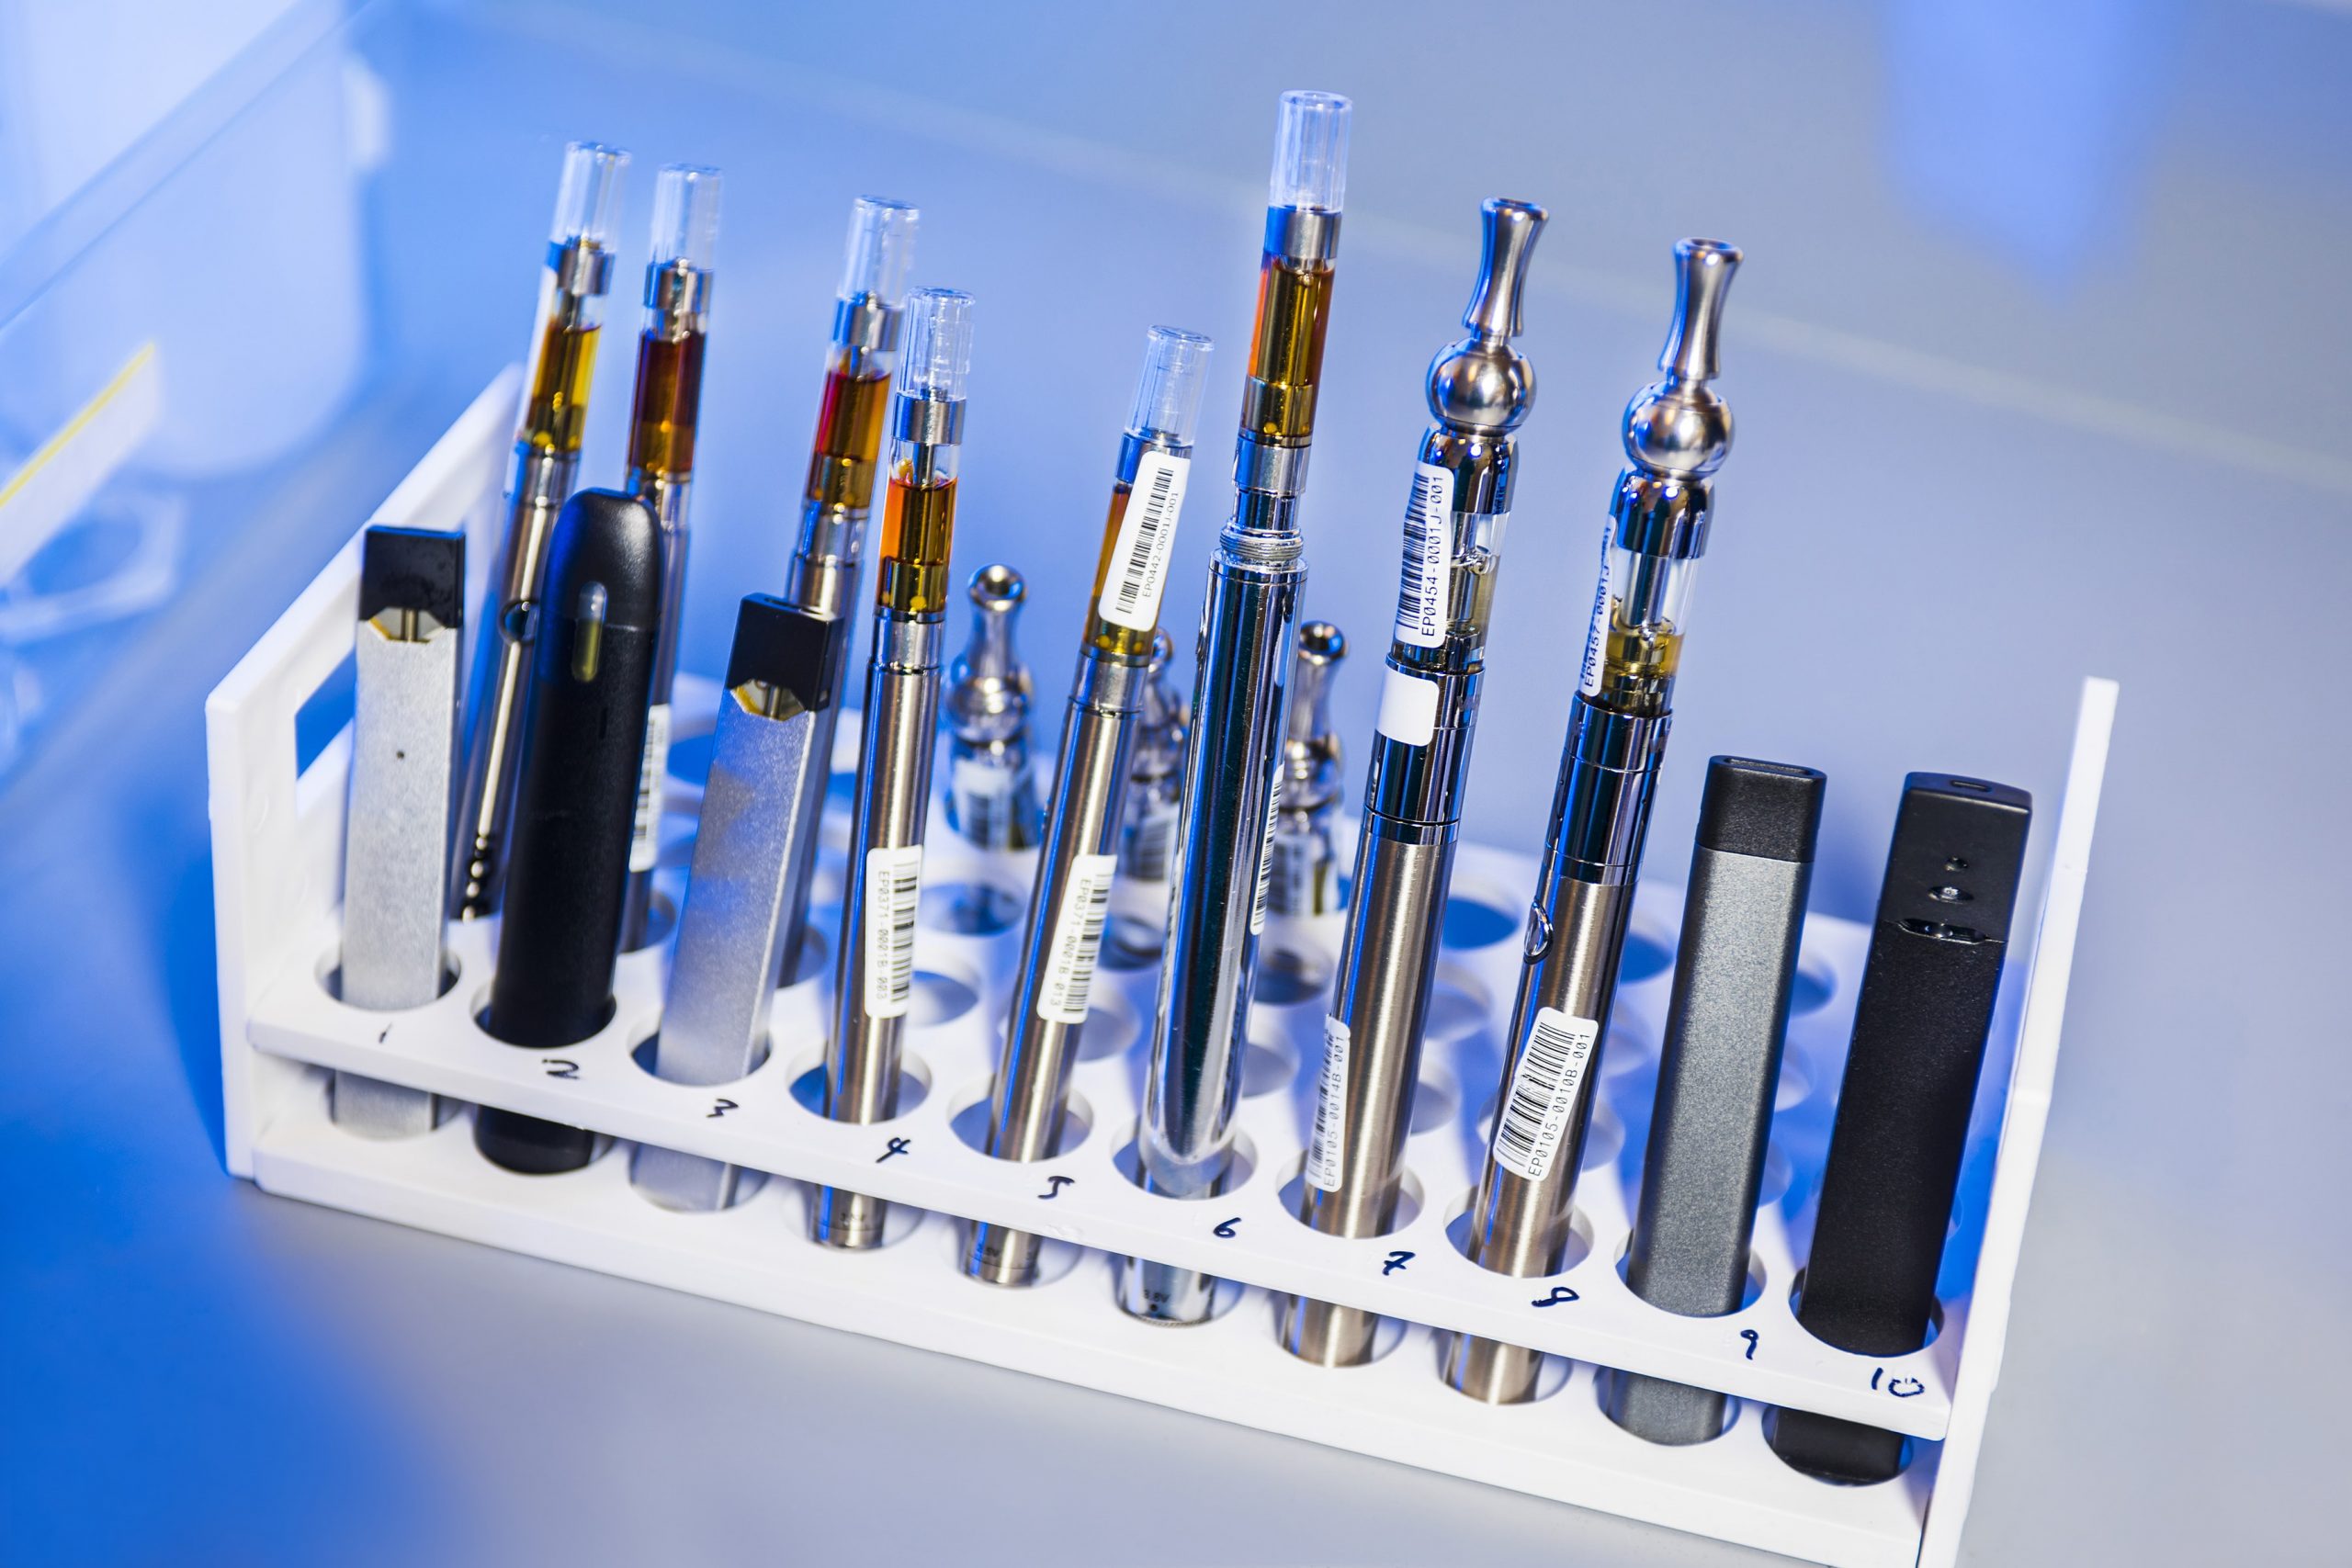 A test tube rack that had been stocked with examples of various electronic cigarettes.